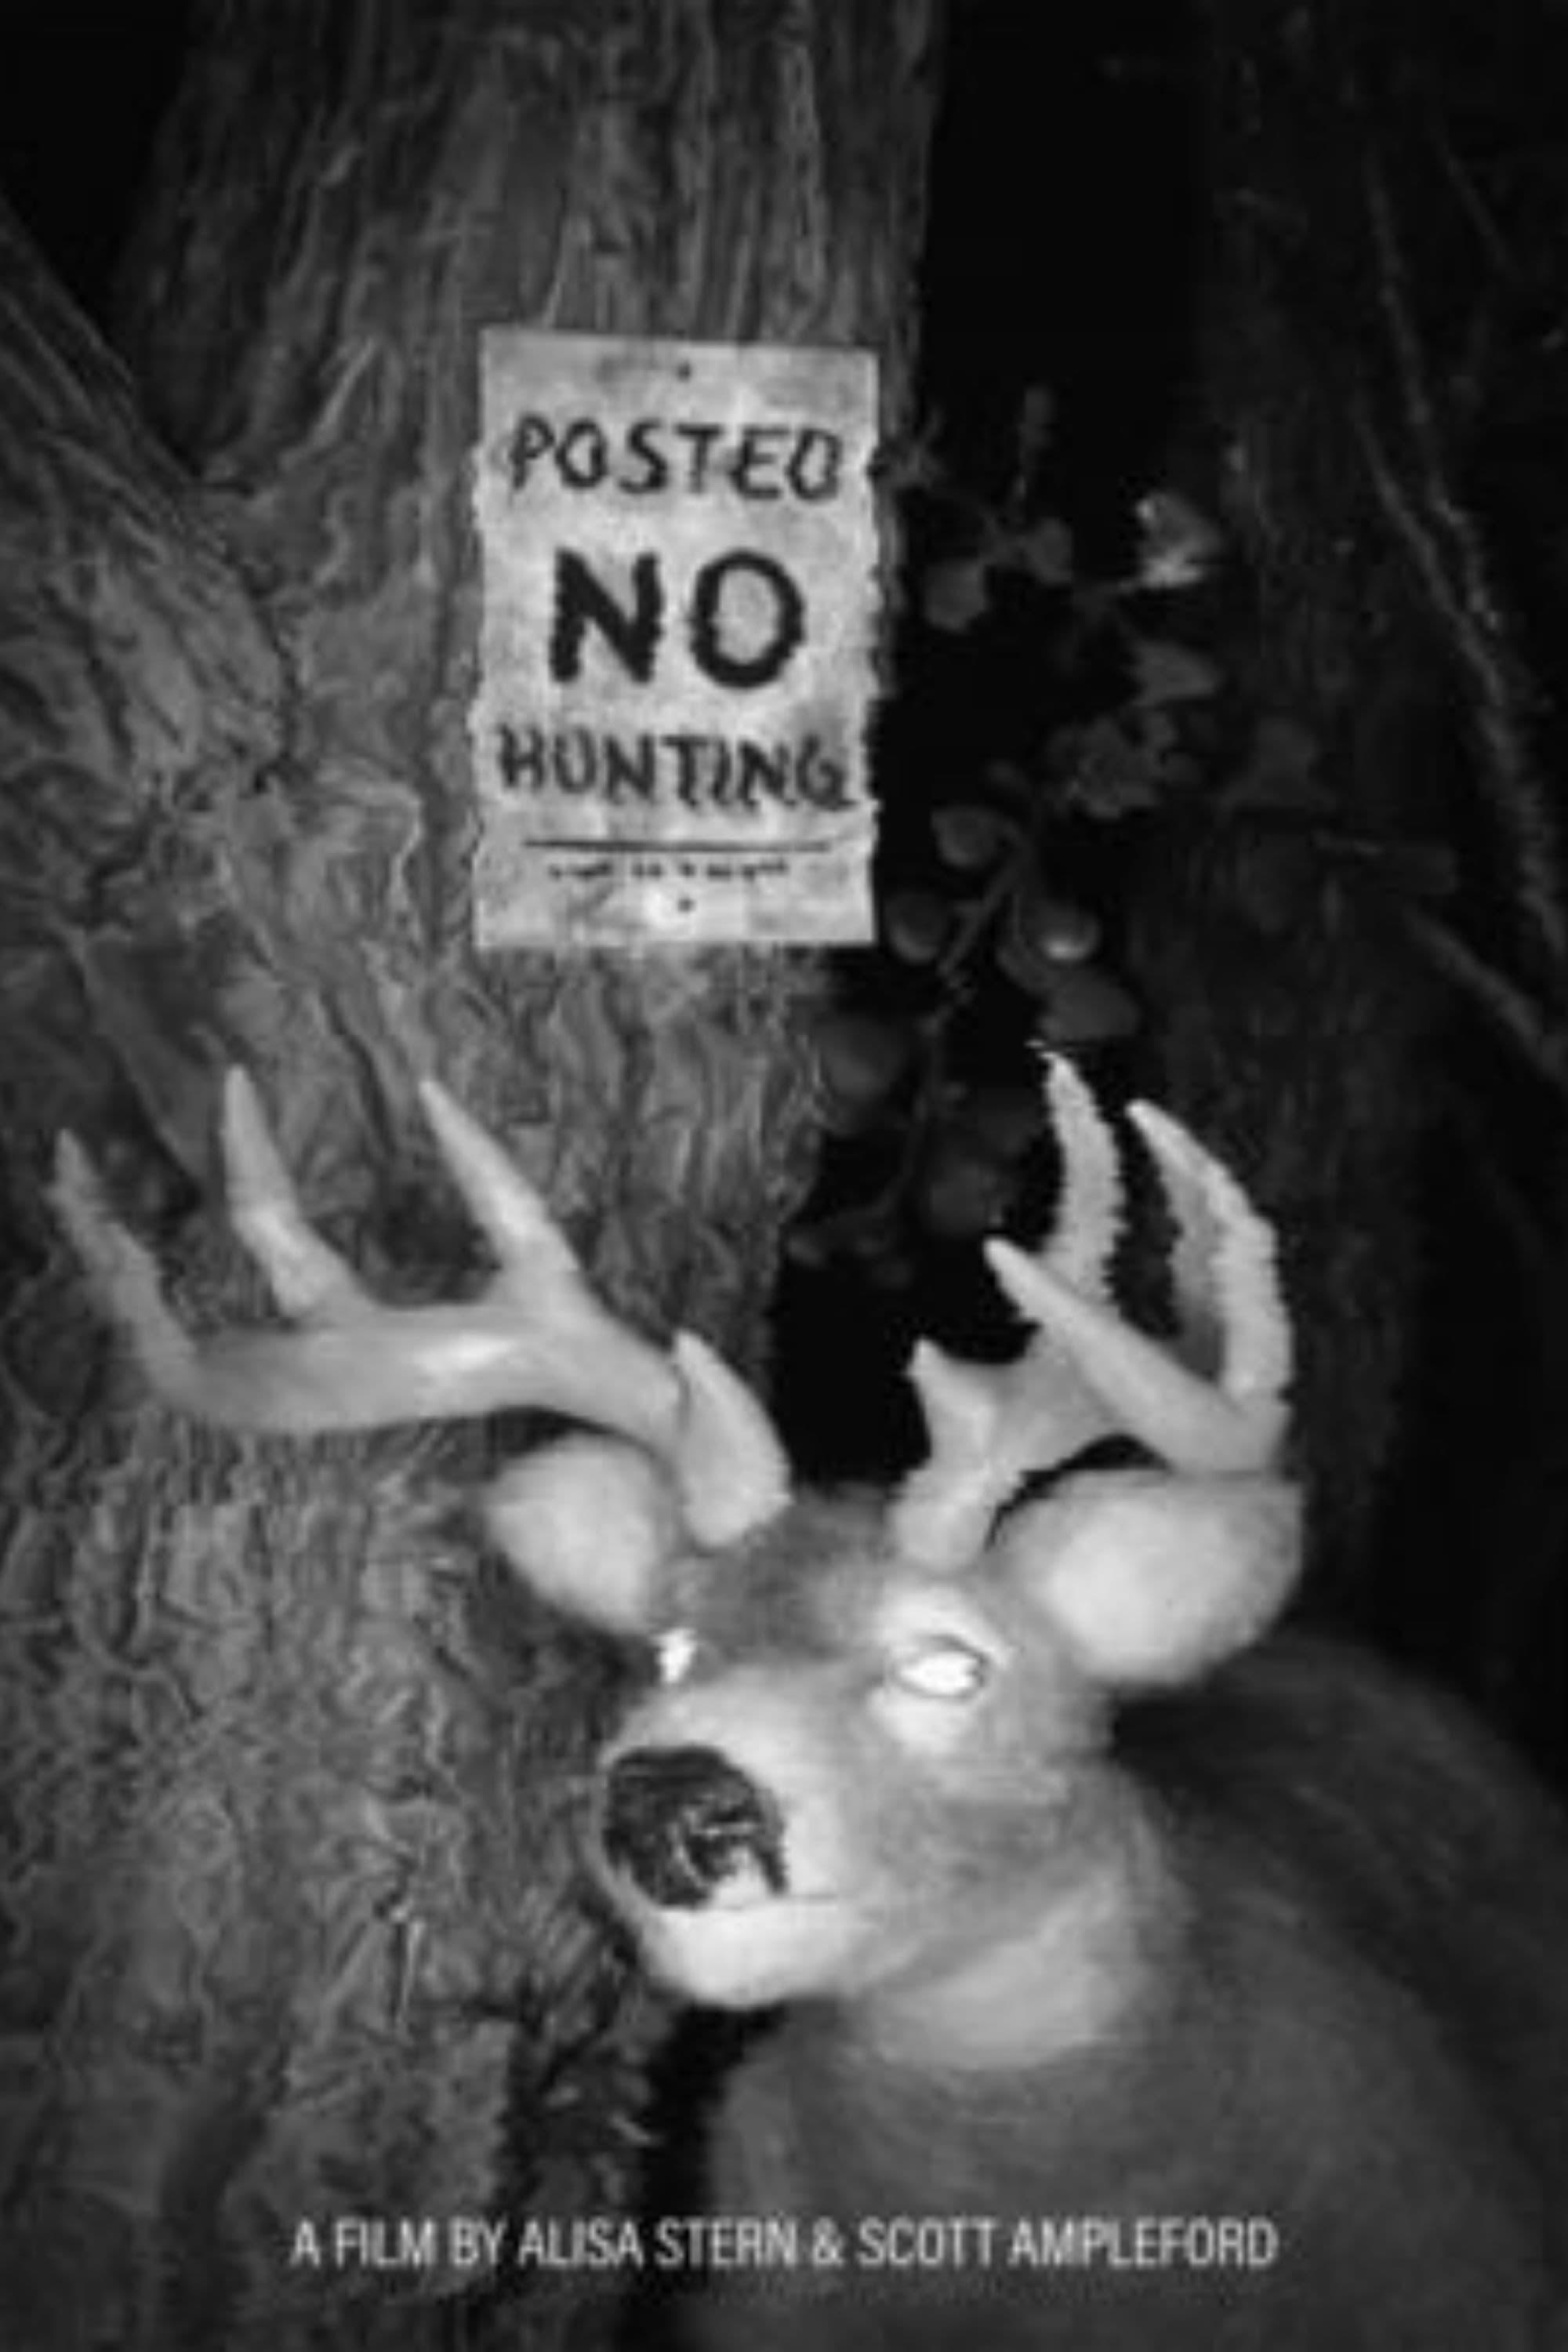 Posted No Hunting poster